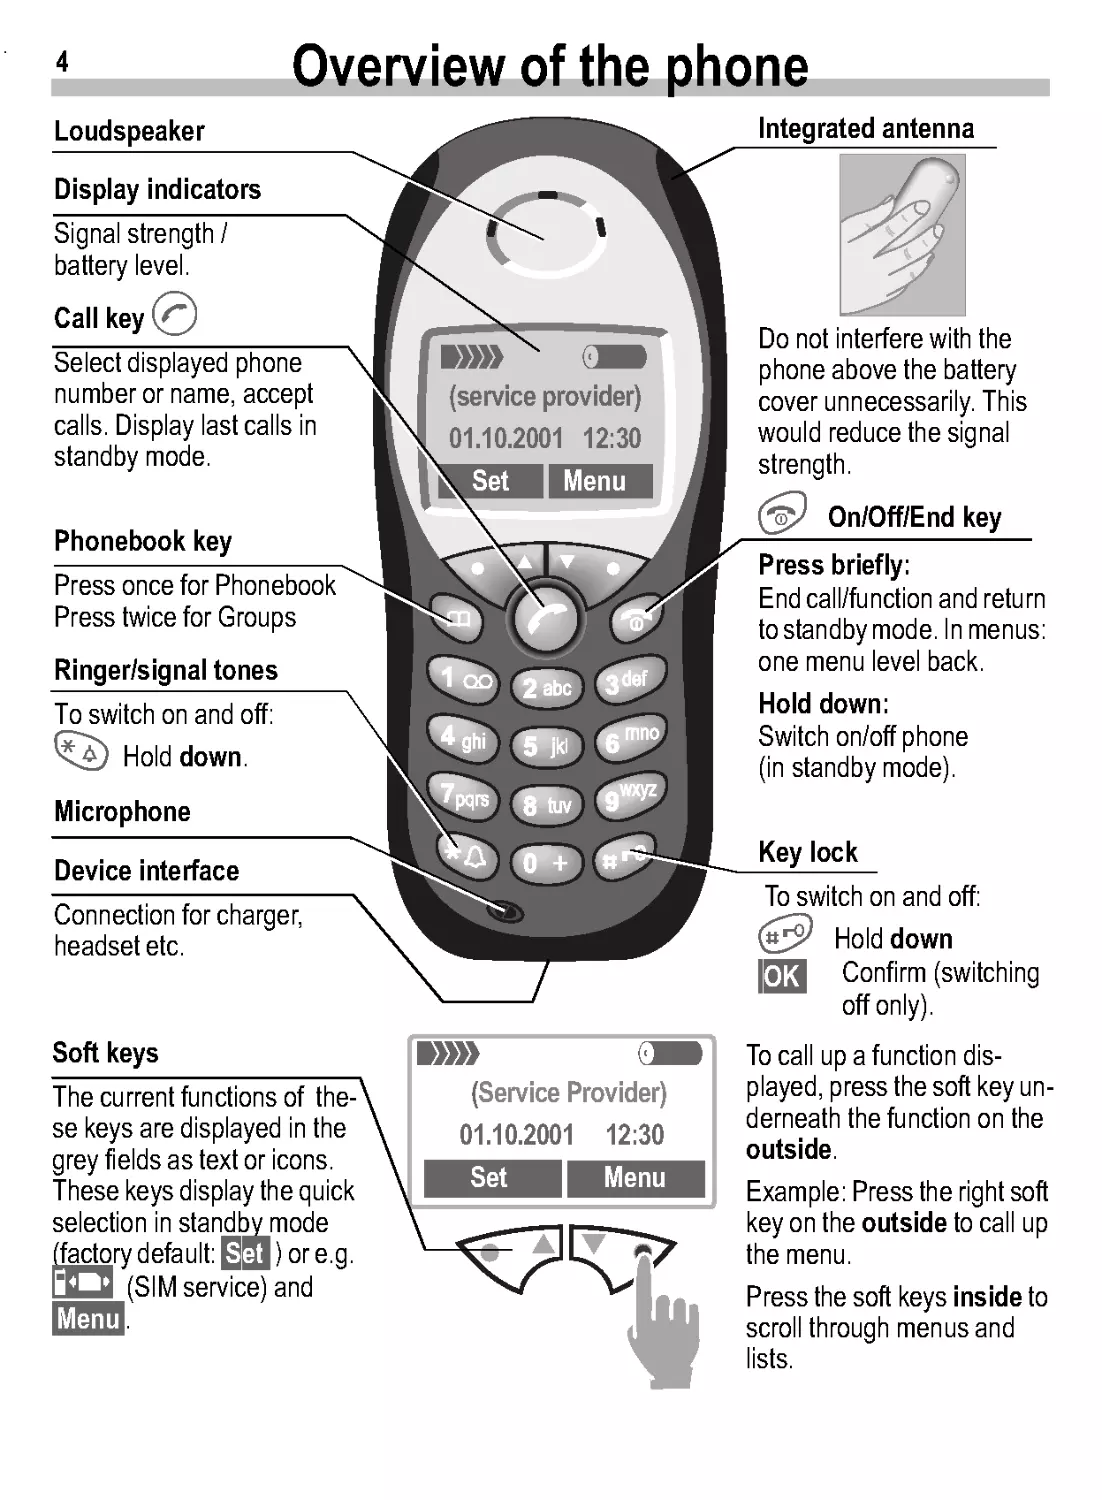 Overview of the phone